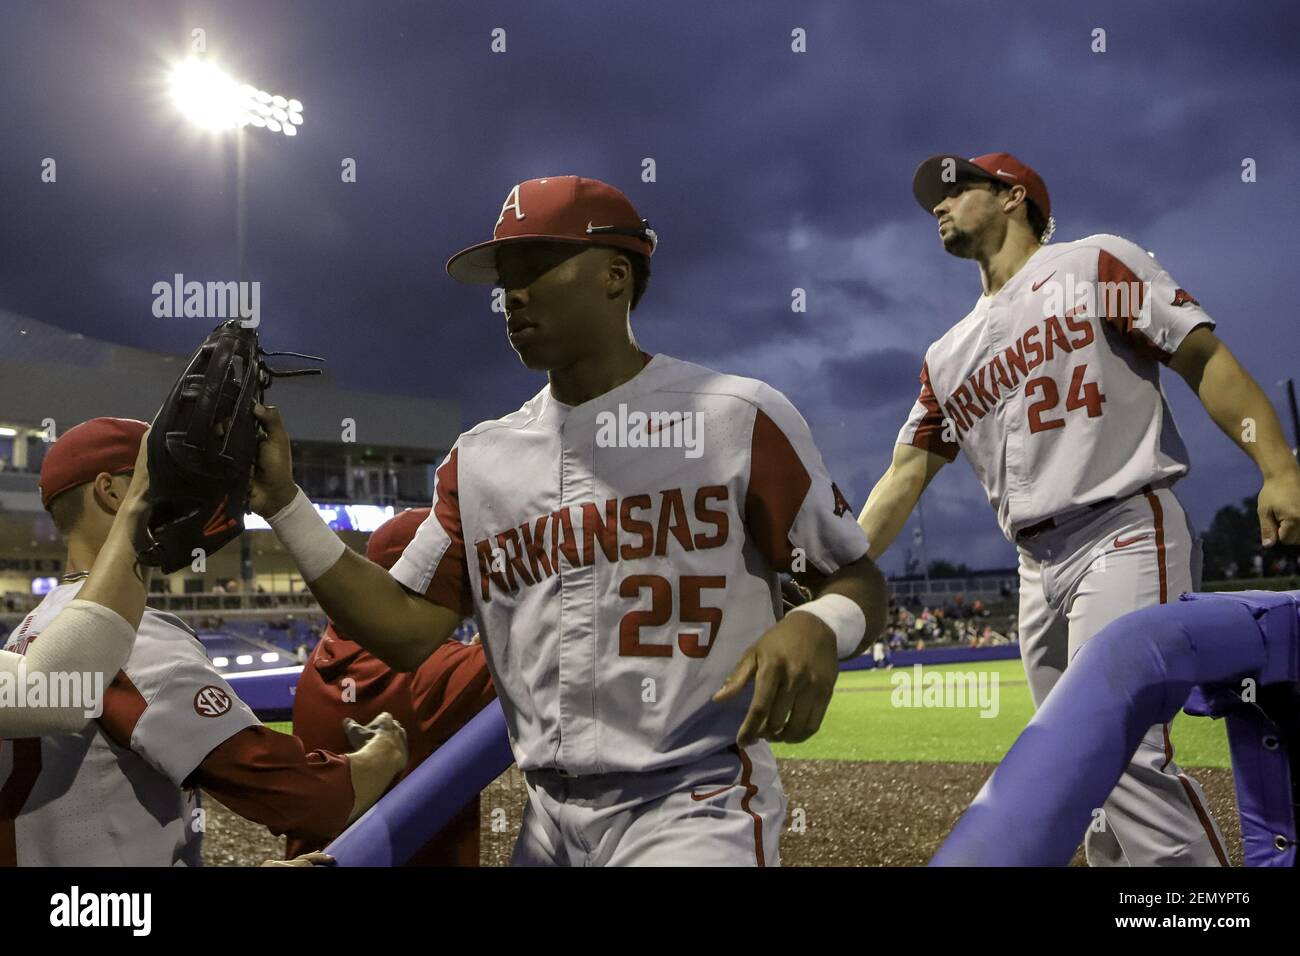 May 3, 2019: Arkansas' Dominic Fletcher (24) and Christian Franklin (25) get high fives from teammates during a game between the Kentucky Wildcats and the Arkansas Razorbacks at Kentucky Pride Park in Lexington, KY. Kevin Schultz/(Photo by Kevin Schultz/CSM/Sipa USA) Stock Photo